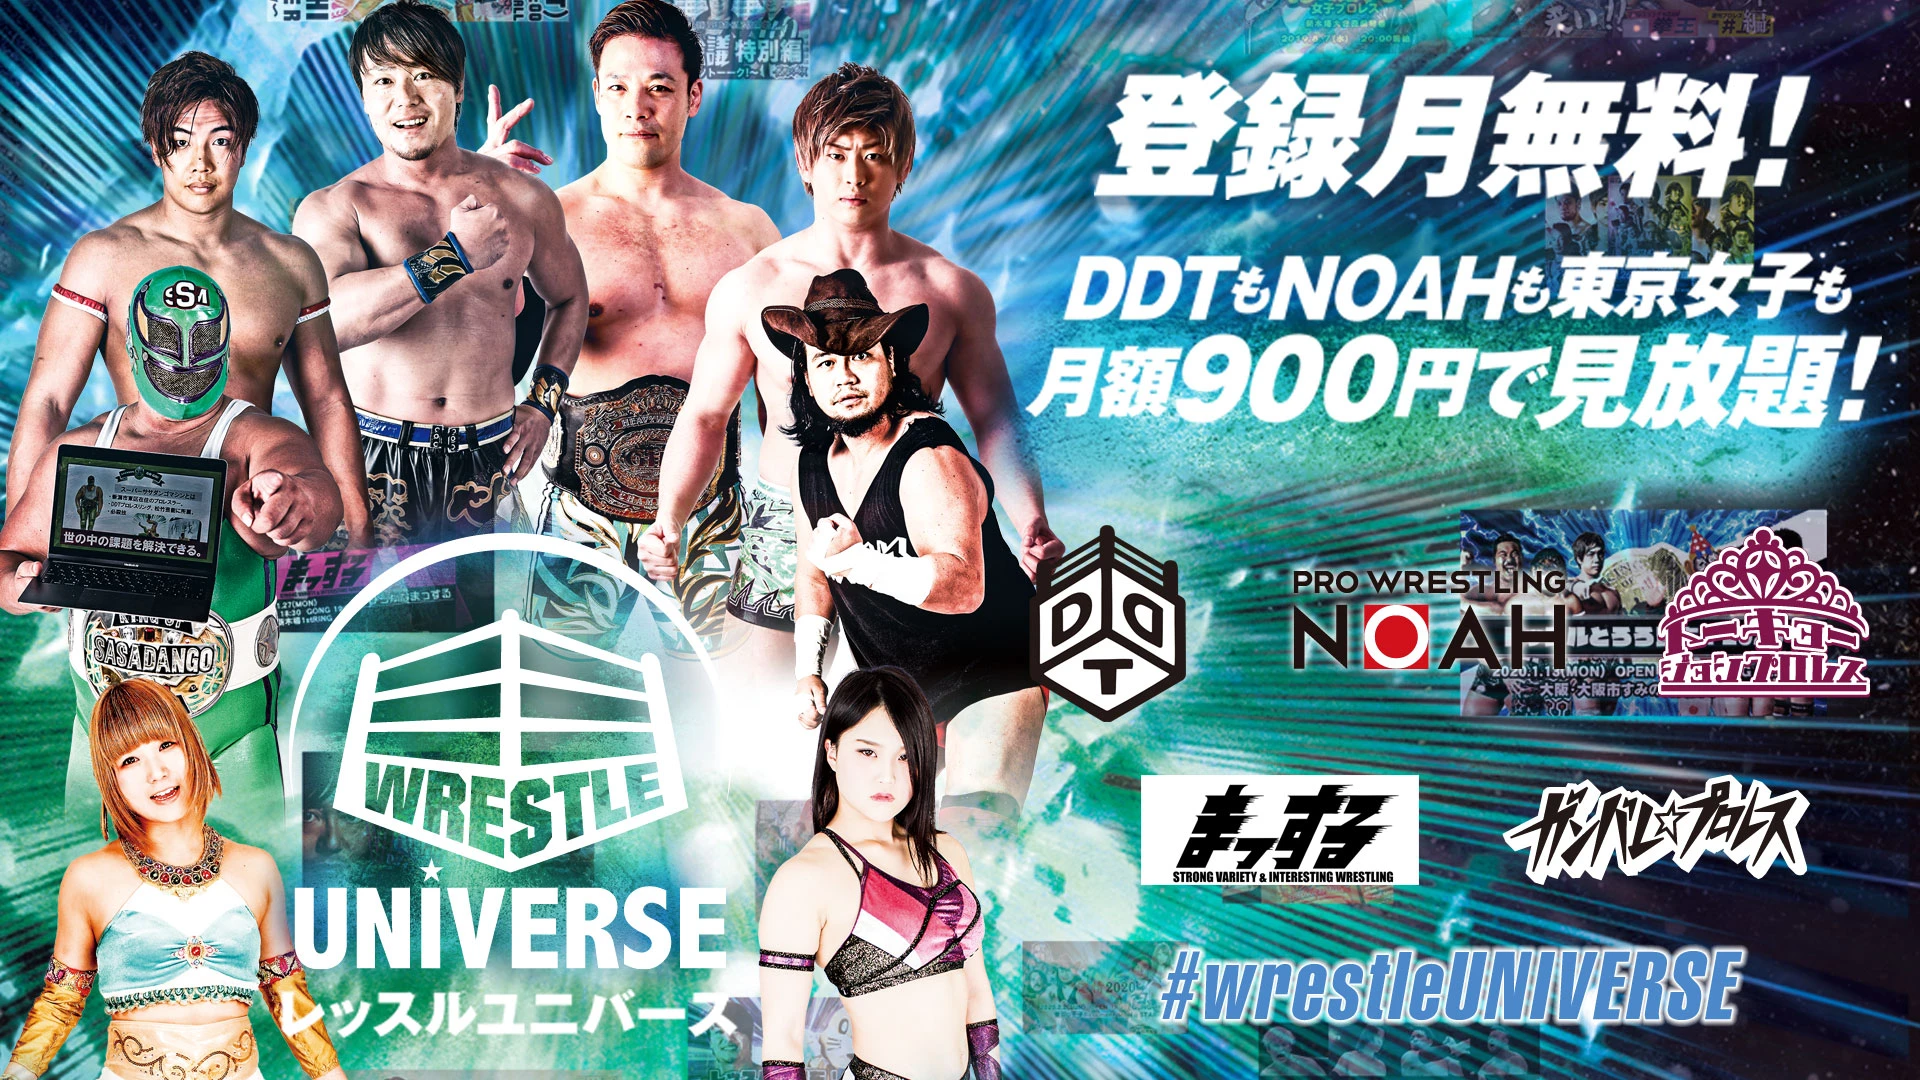 DDT UNIVERSE to be rebranded to WRESTLE UNIVERSE with the expansion of its services!